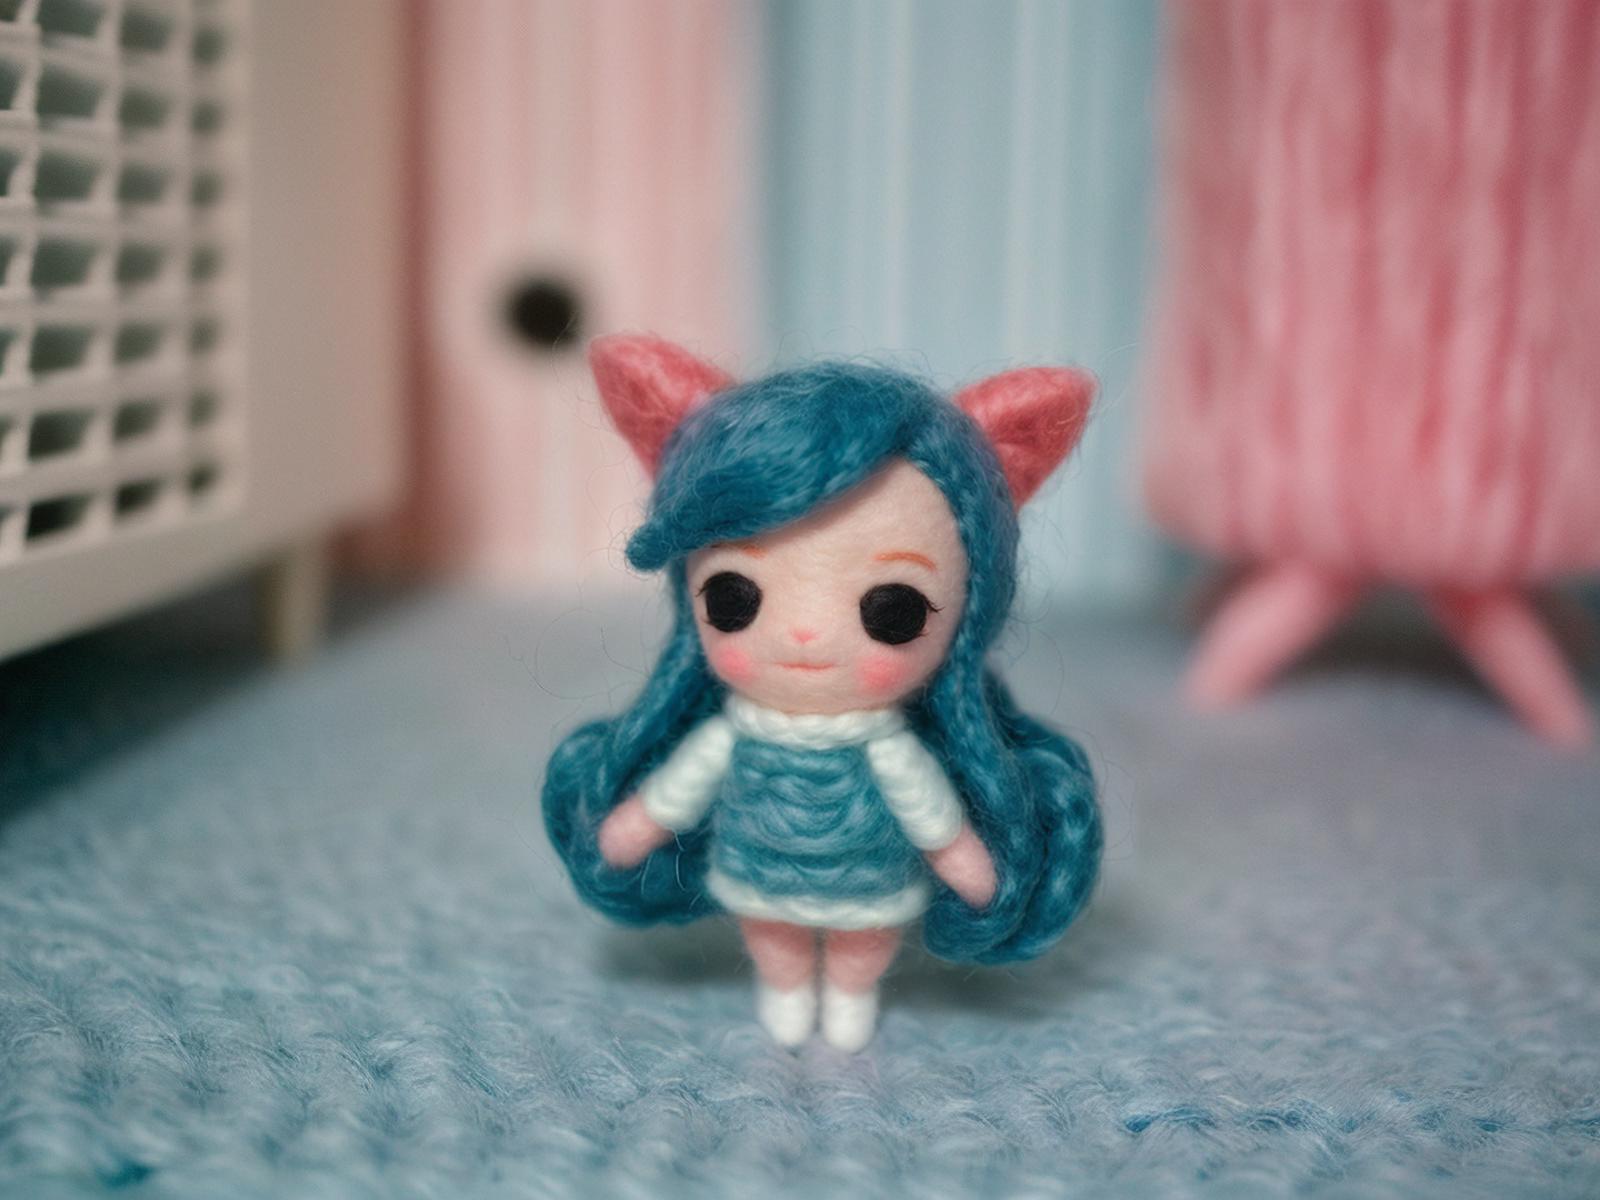 A small doll with blue hair, a white sweater, and a blue and white dress standing on a blue carpet.